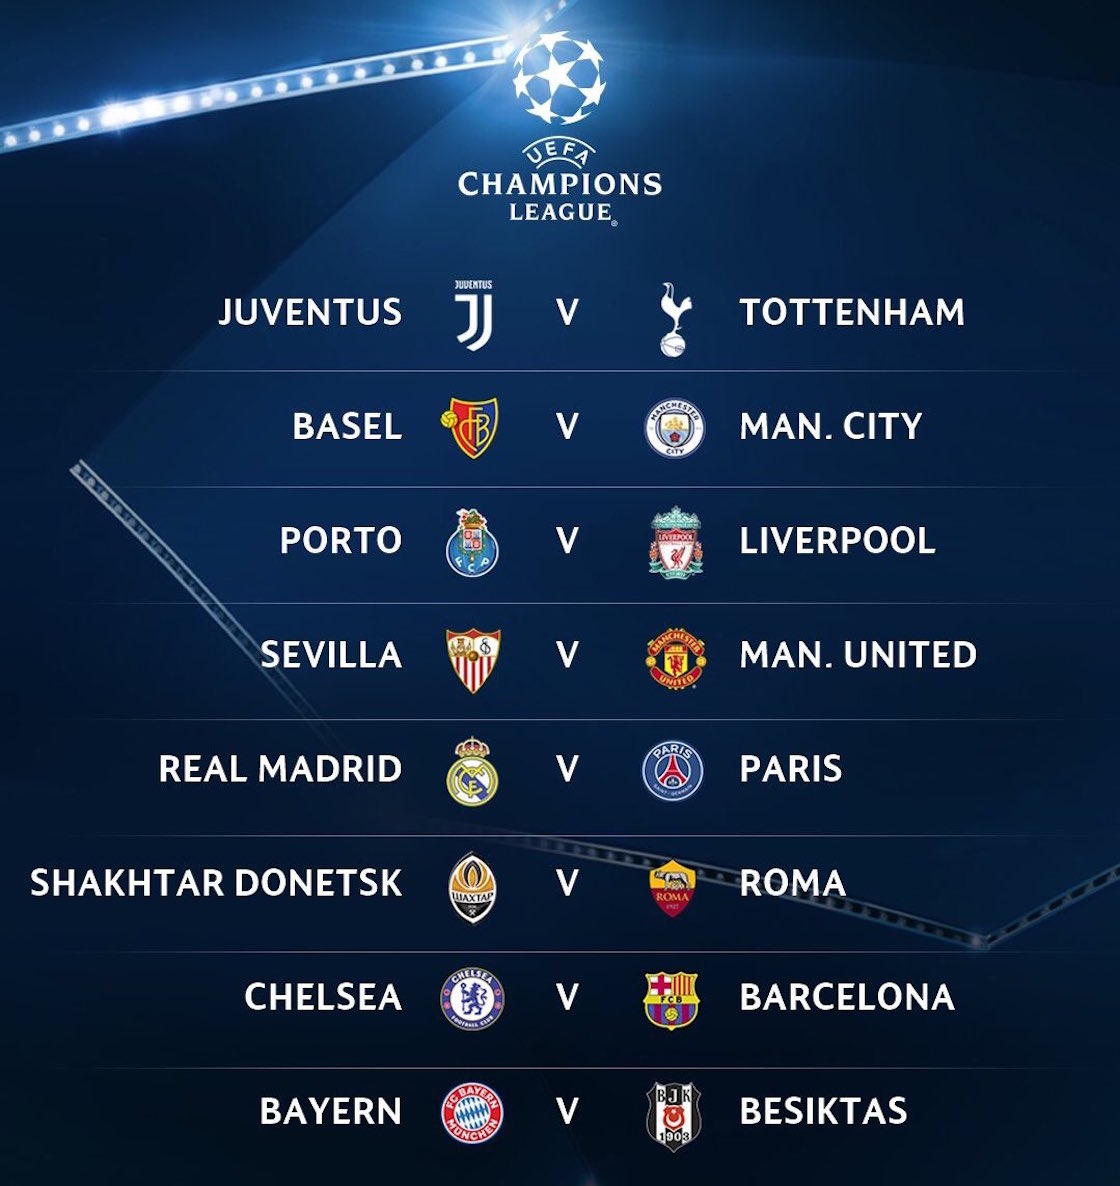 Octavos Inal Champions League 